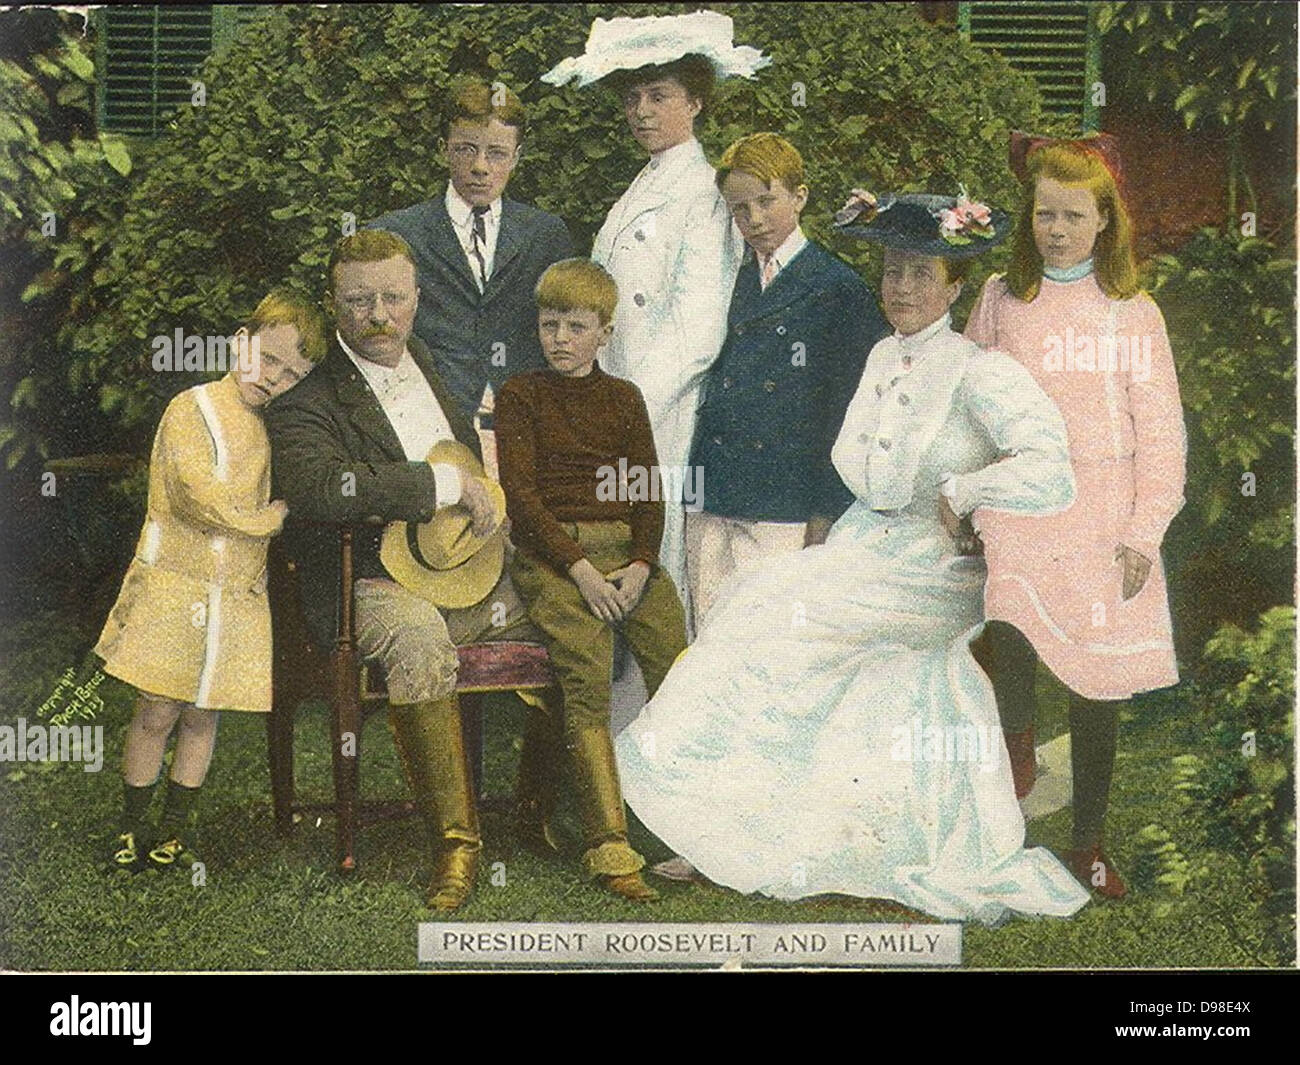 Theodore D. Roosevelt (1858-1919) 26th President of the United States of America (1901-1909) with his wife and family, c1906. Stock Photo